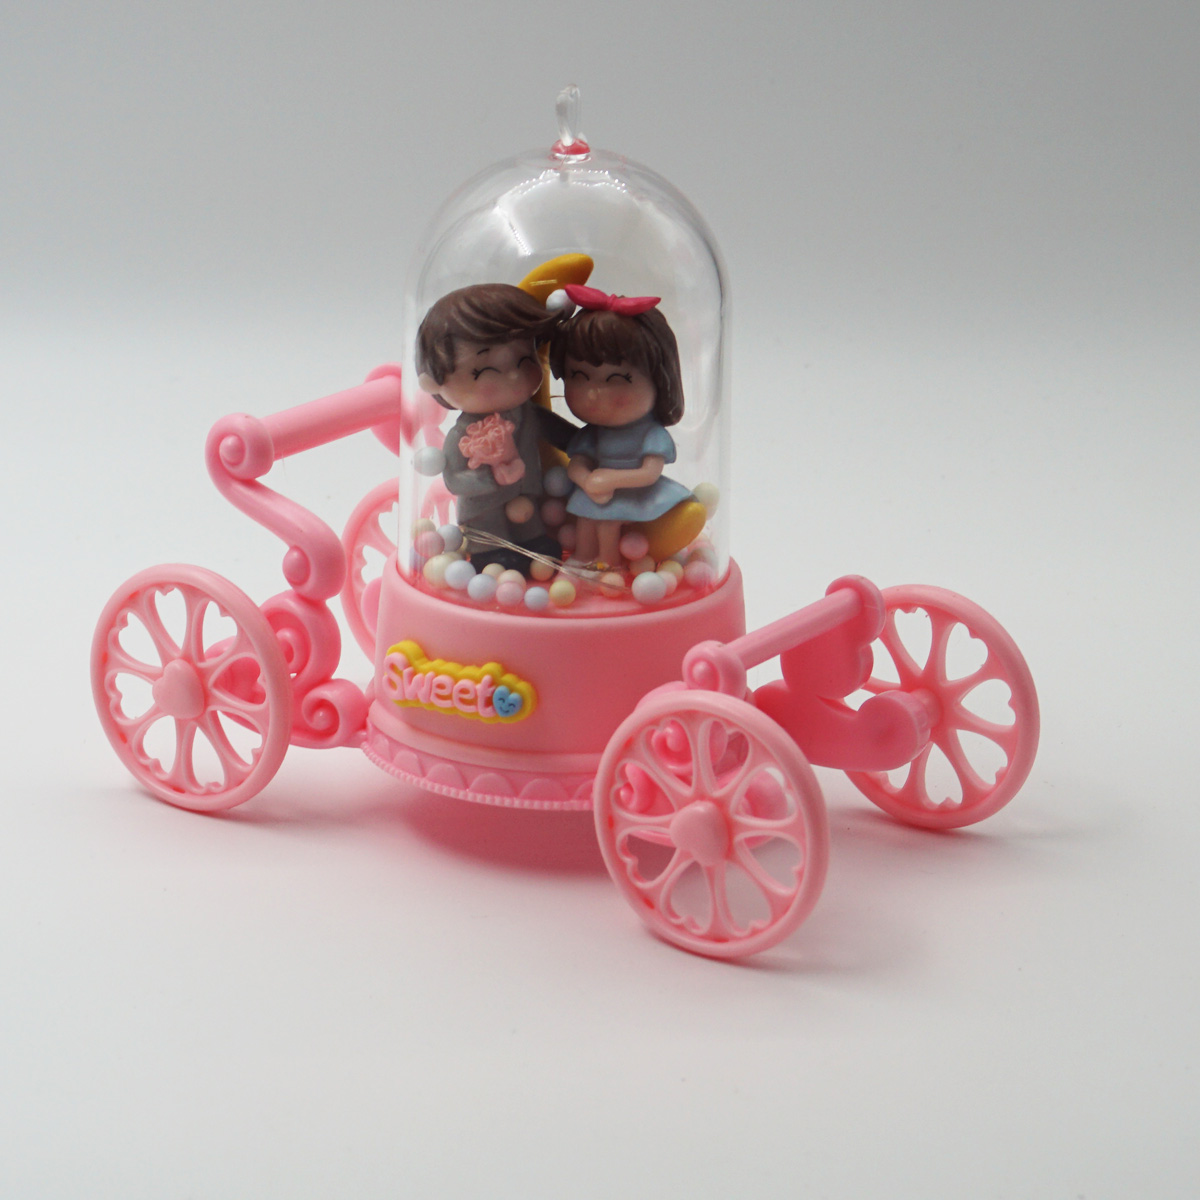 penhouse.in Pinky Sweet Memorable Couple With Music and Lighting Gift With Wheels SKU 96790